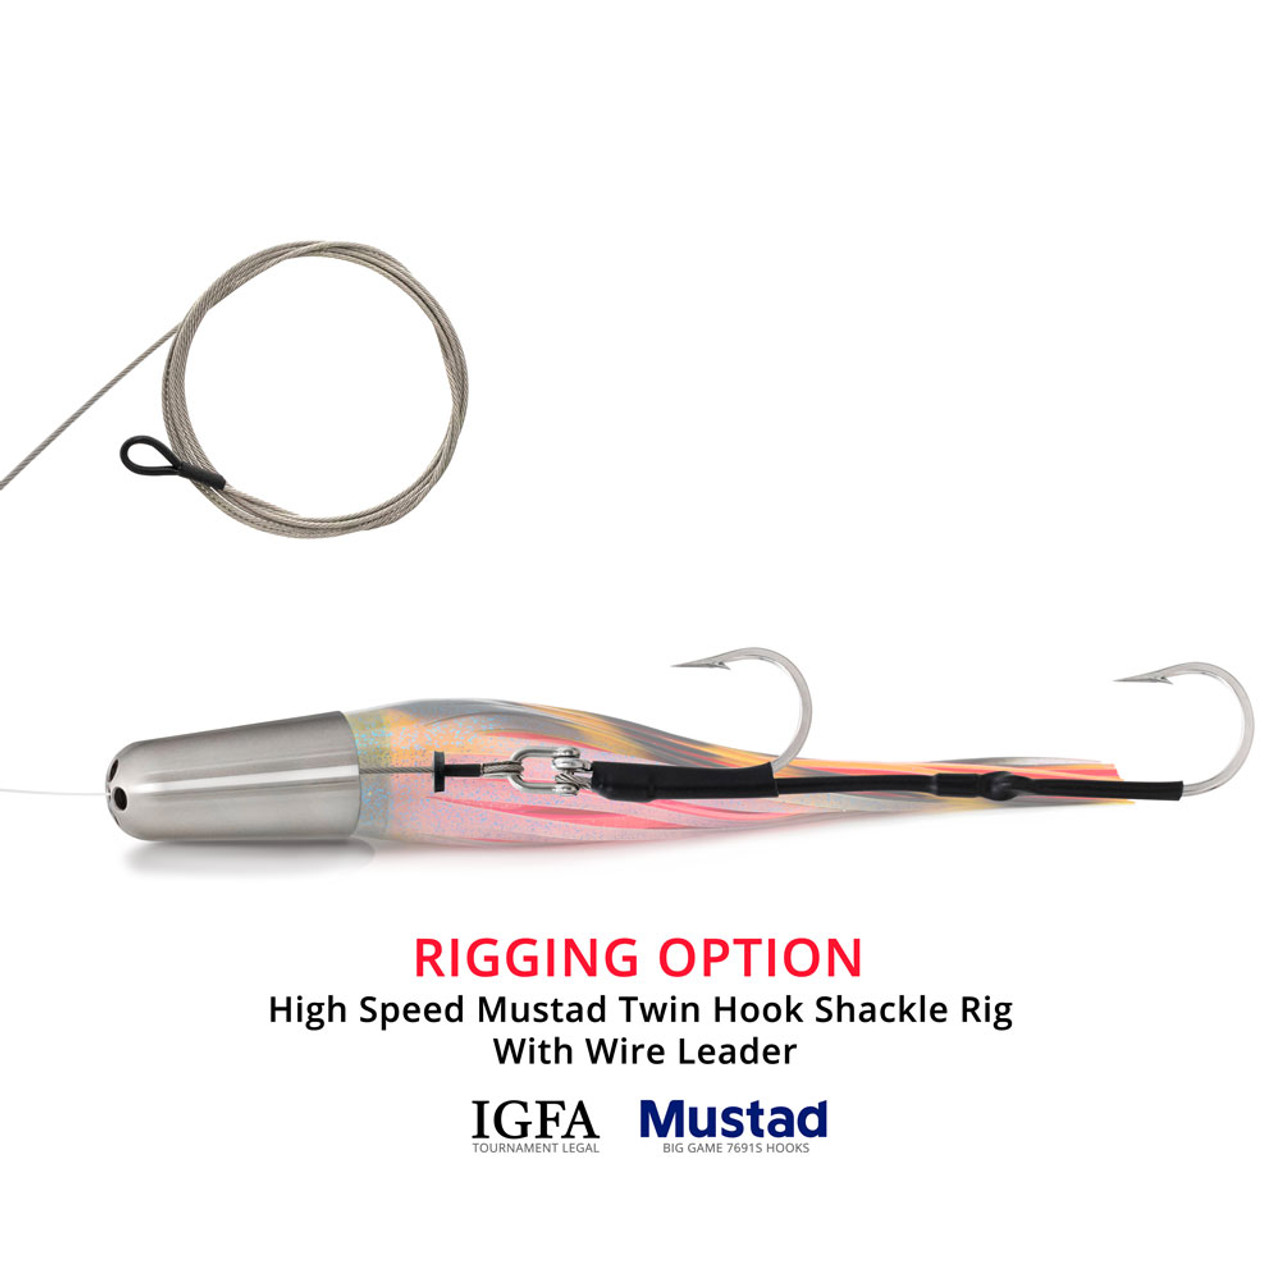 zacatak-lures-high-speed-rigging-option-twin-hook-shackle-rig